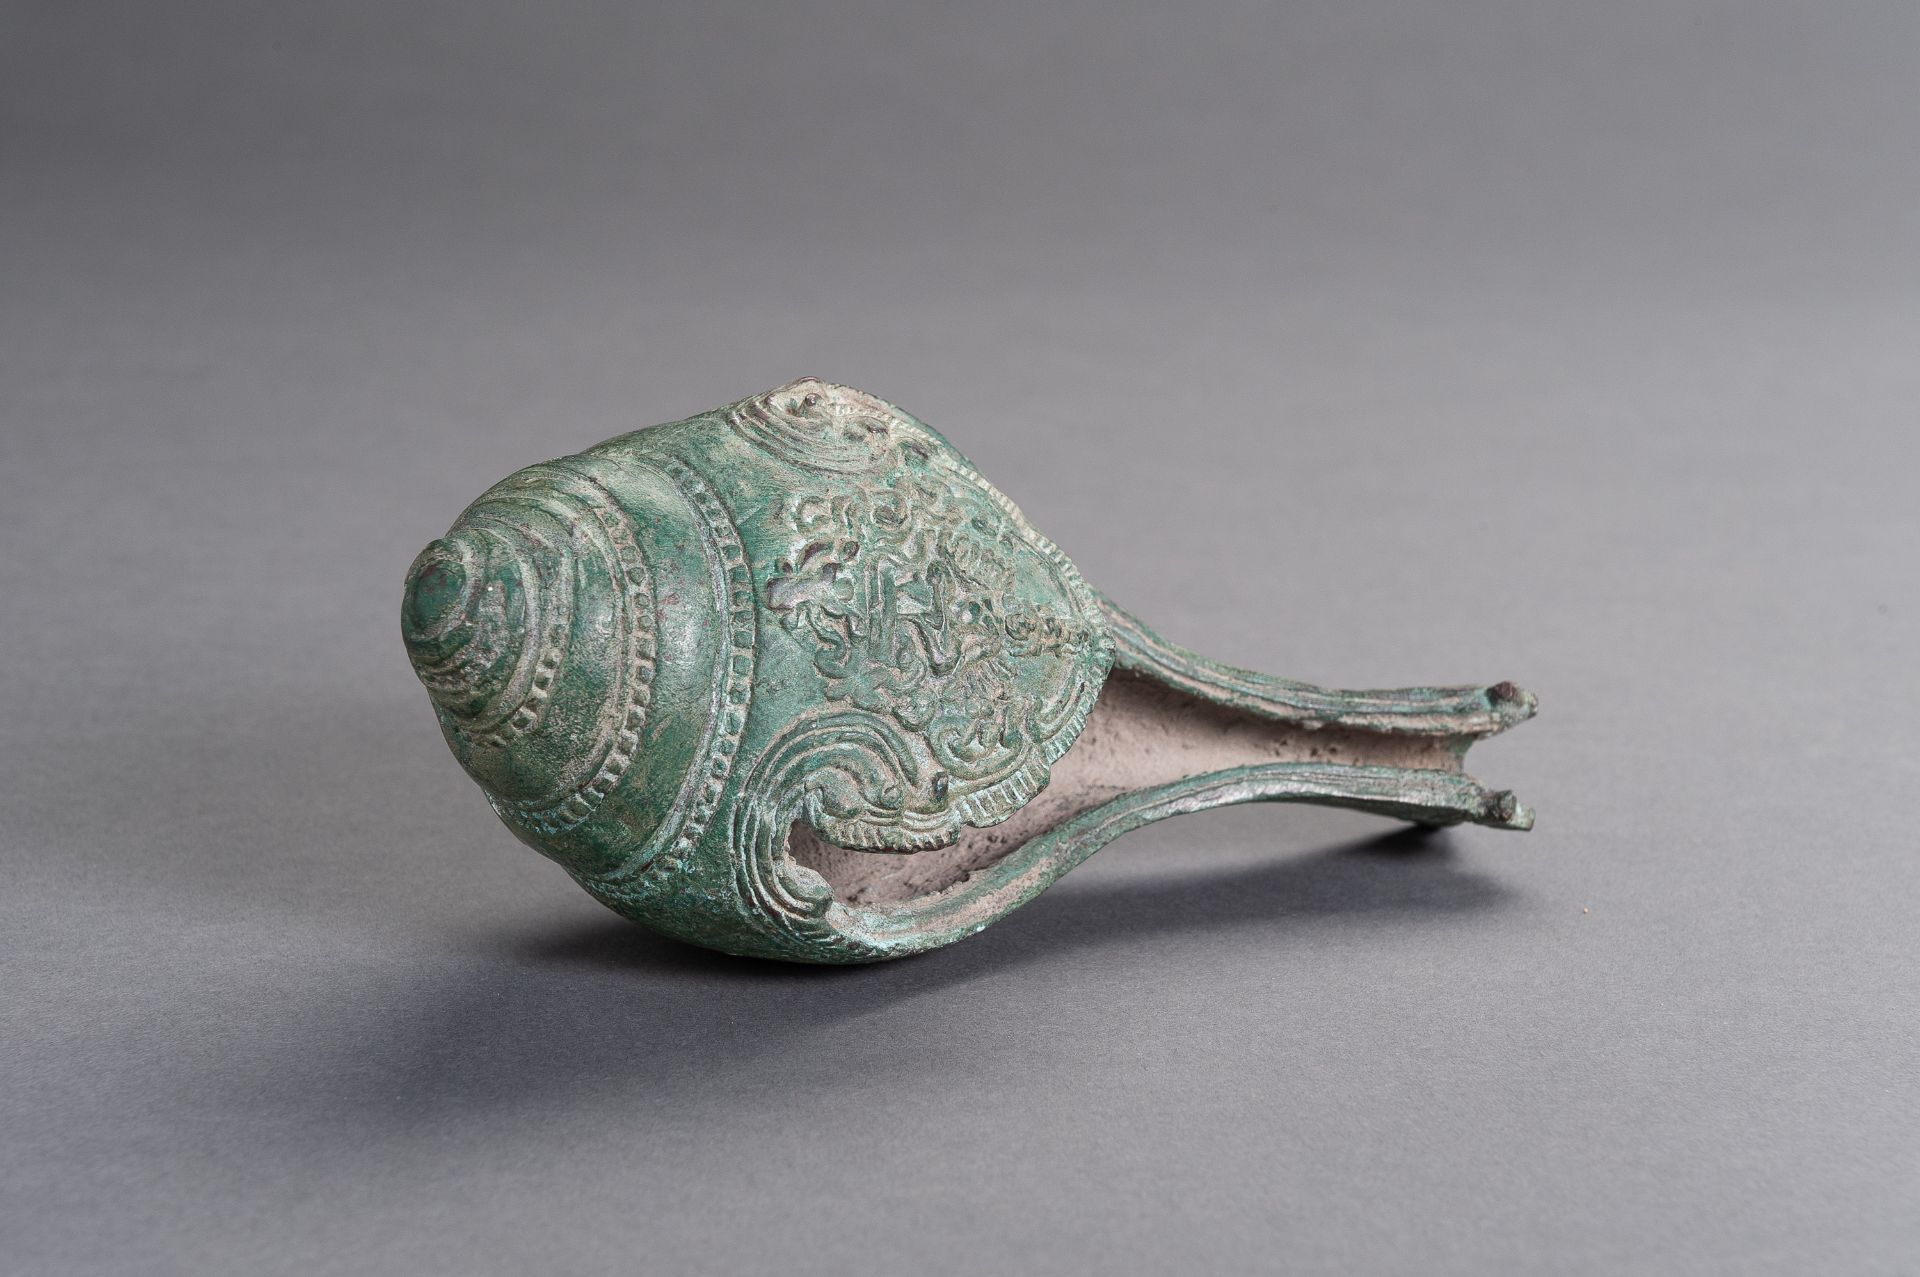 A BRONZE KHMER CONCH SHELL - Image 10 of 12